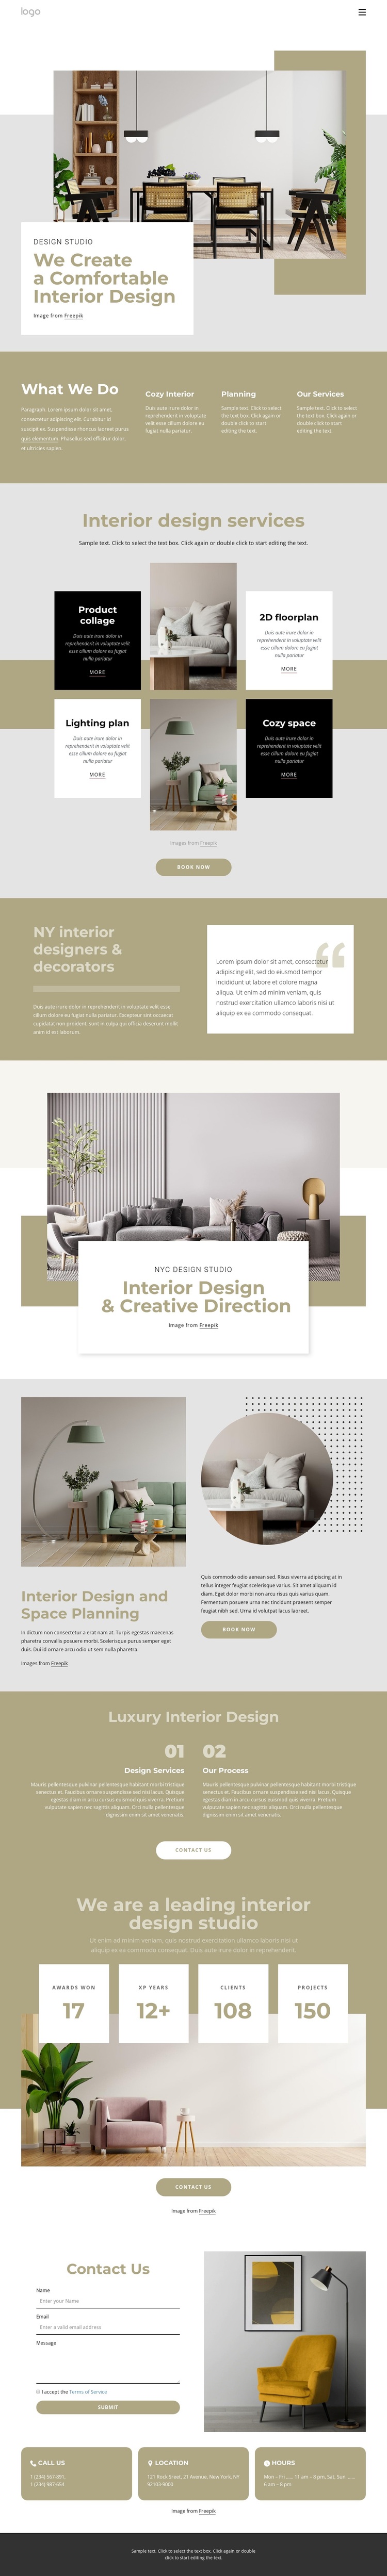 We create a comfortable interiors Template